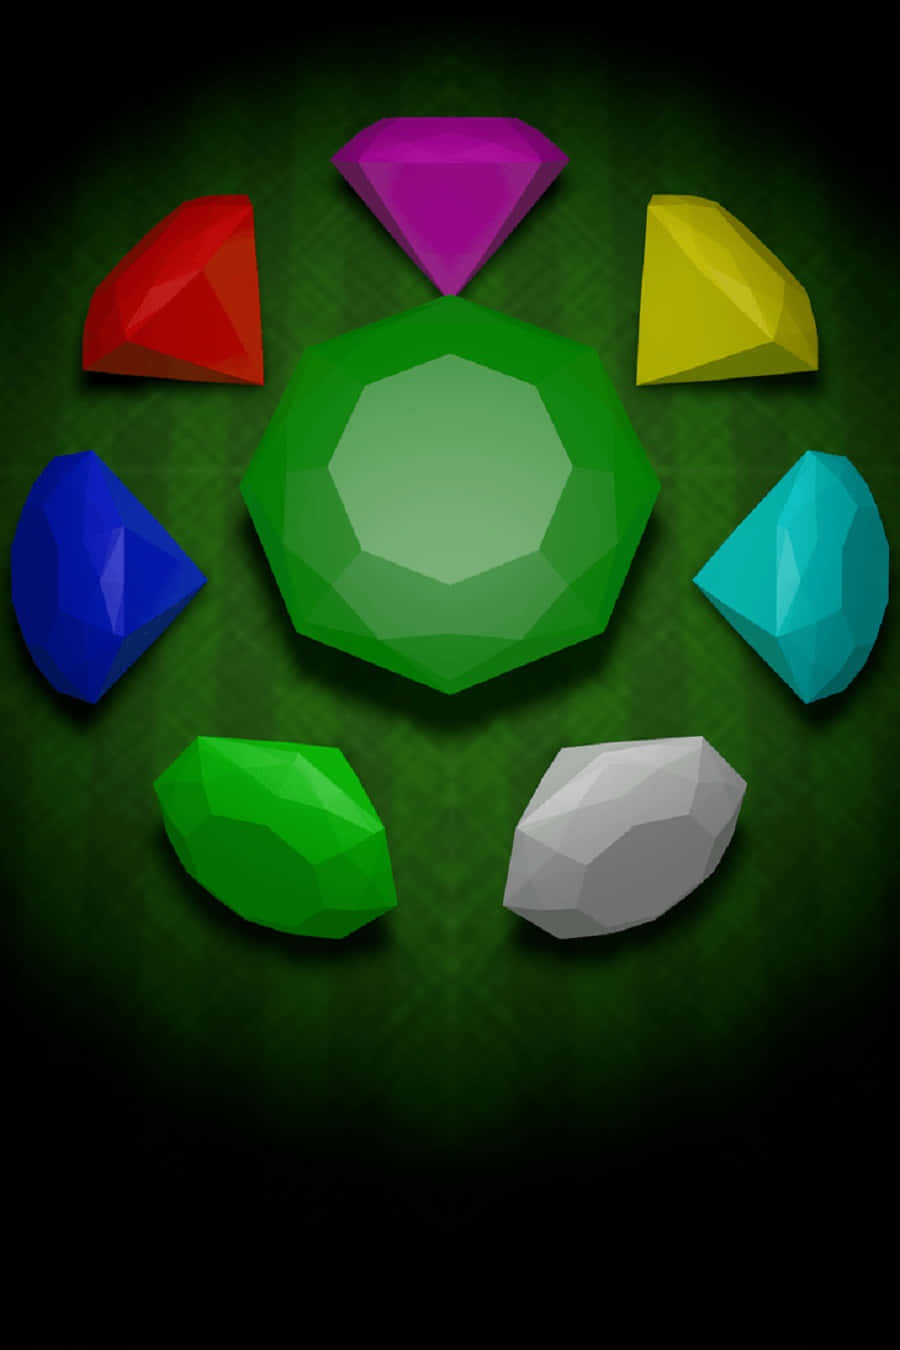 Shimmering Chaos Emeralds against a cosmic background Wallpaper